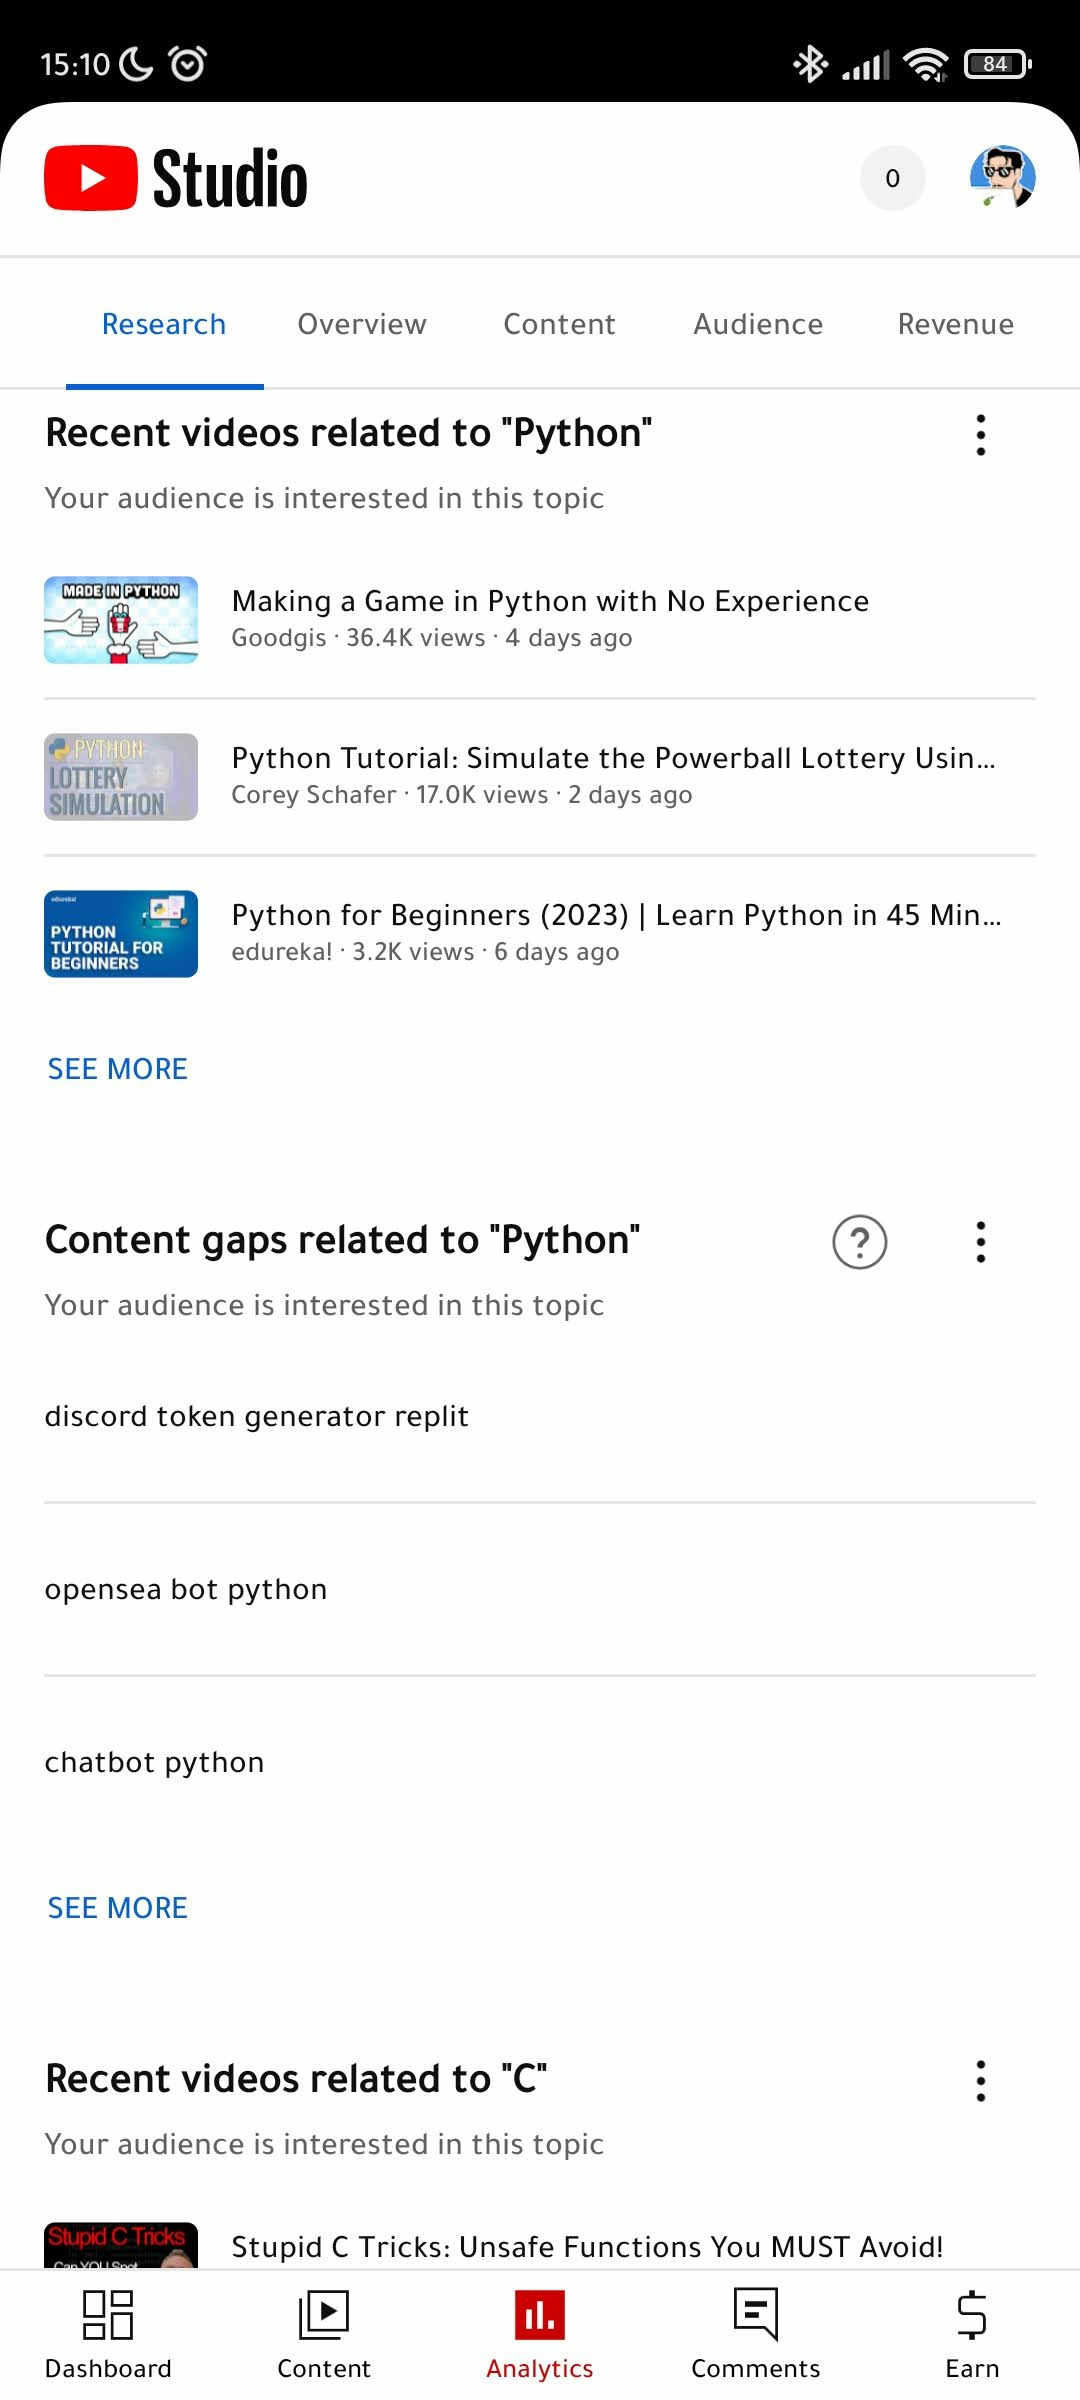 Your audience is interested in Python and C, they want to know about discord token generators replit, opensea bot python, and chatbot python